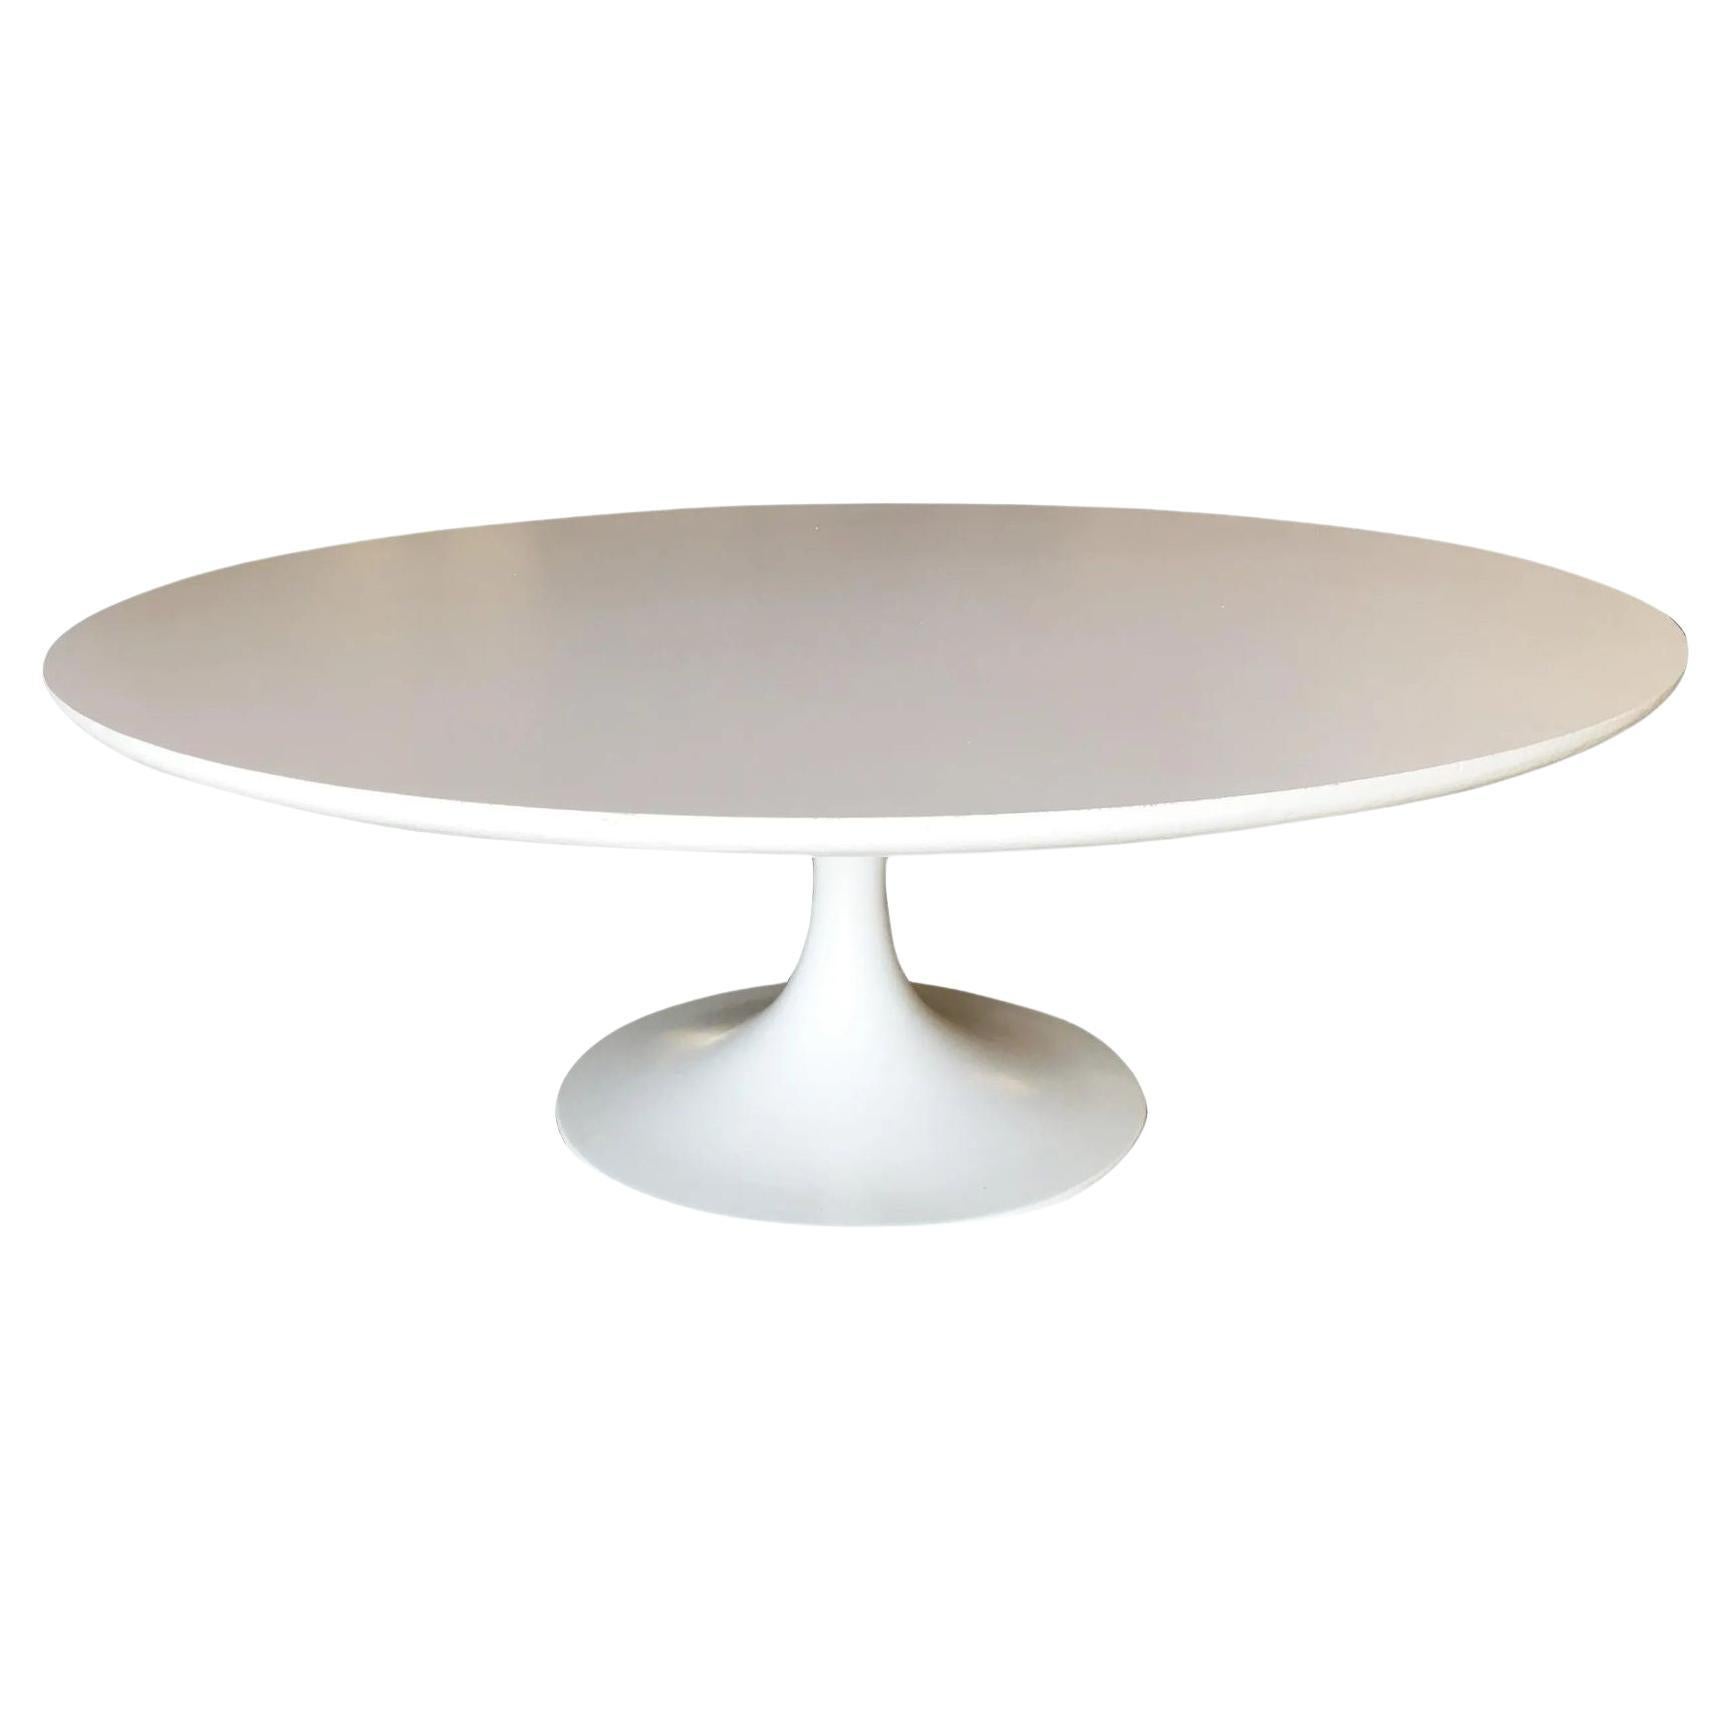 Round 42" Tulip Coffee Table by Eero Saarinen for Knoll For Sale